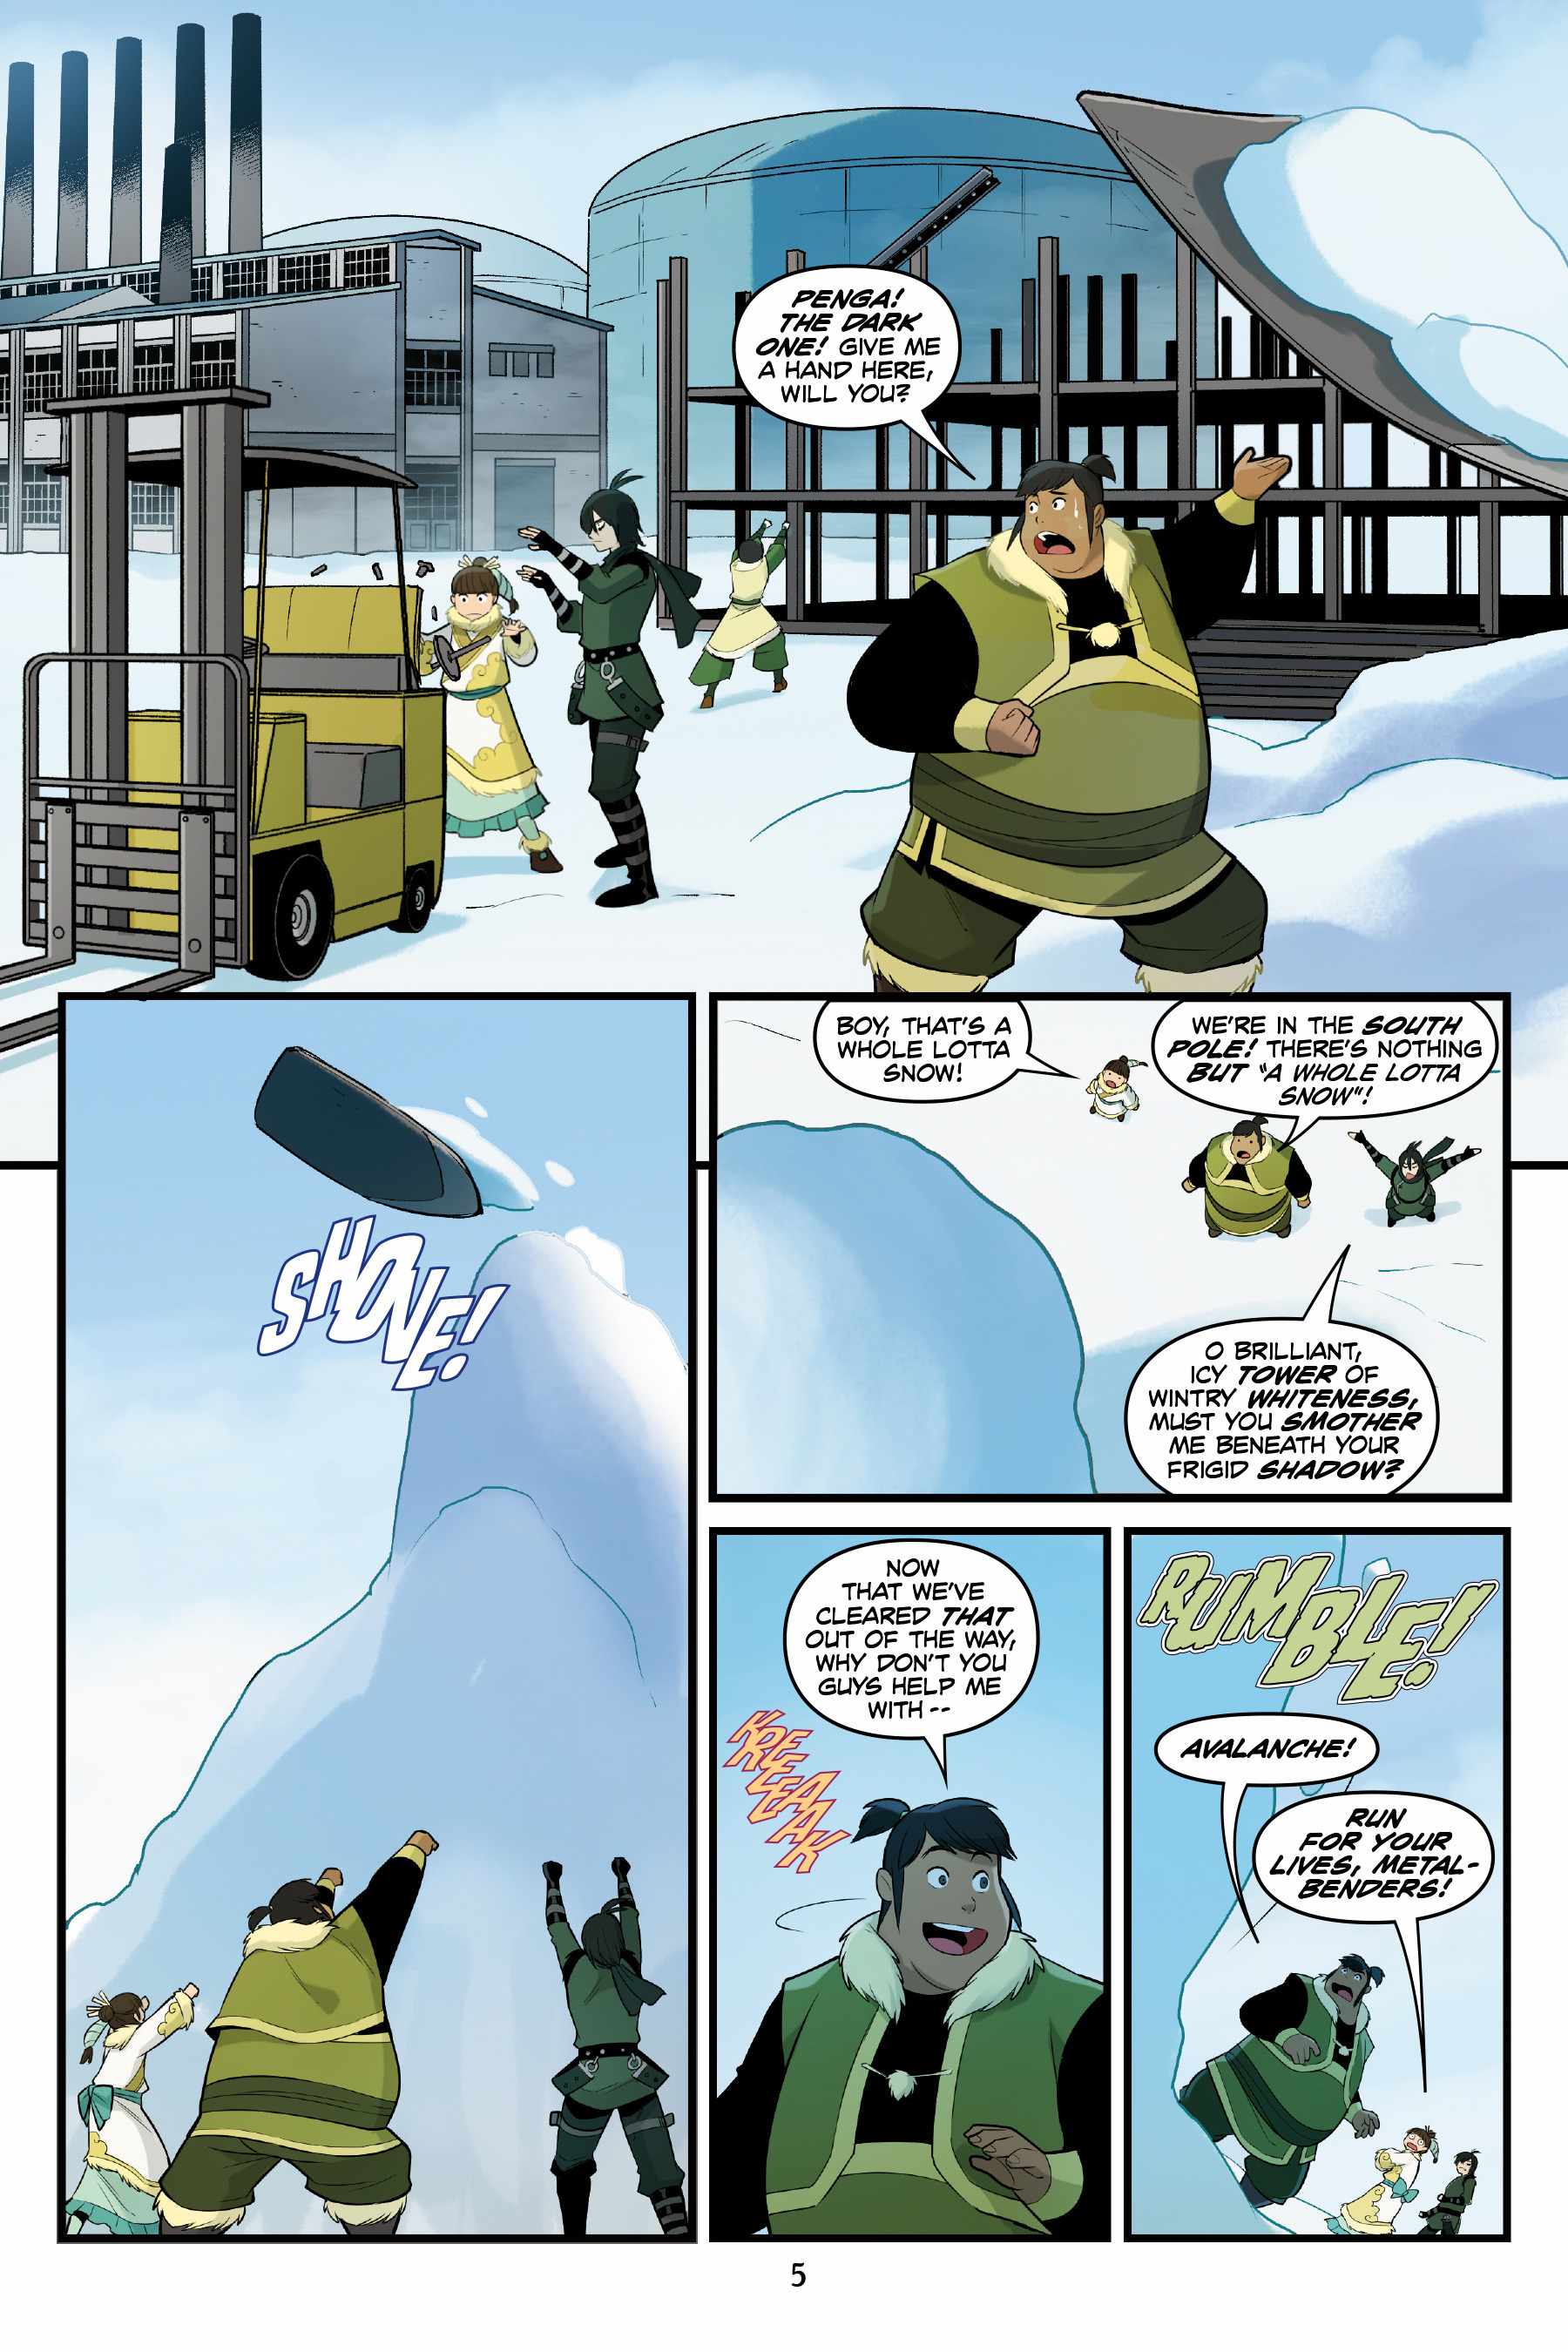 Read Comics Online Free - Avatar The Last Airbender Comic Book Issue #015 -  Page 39